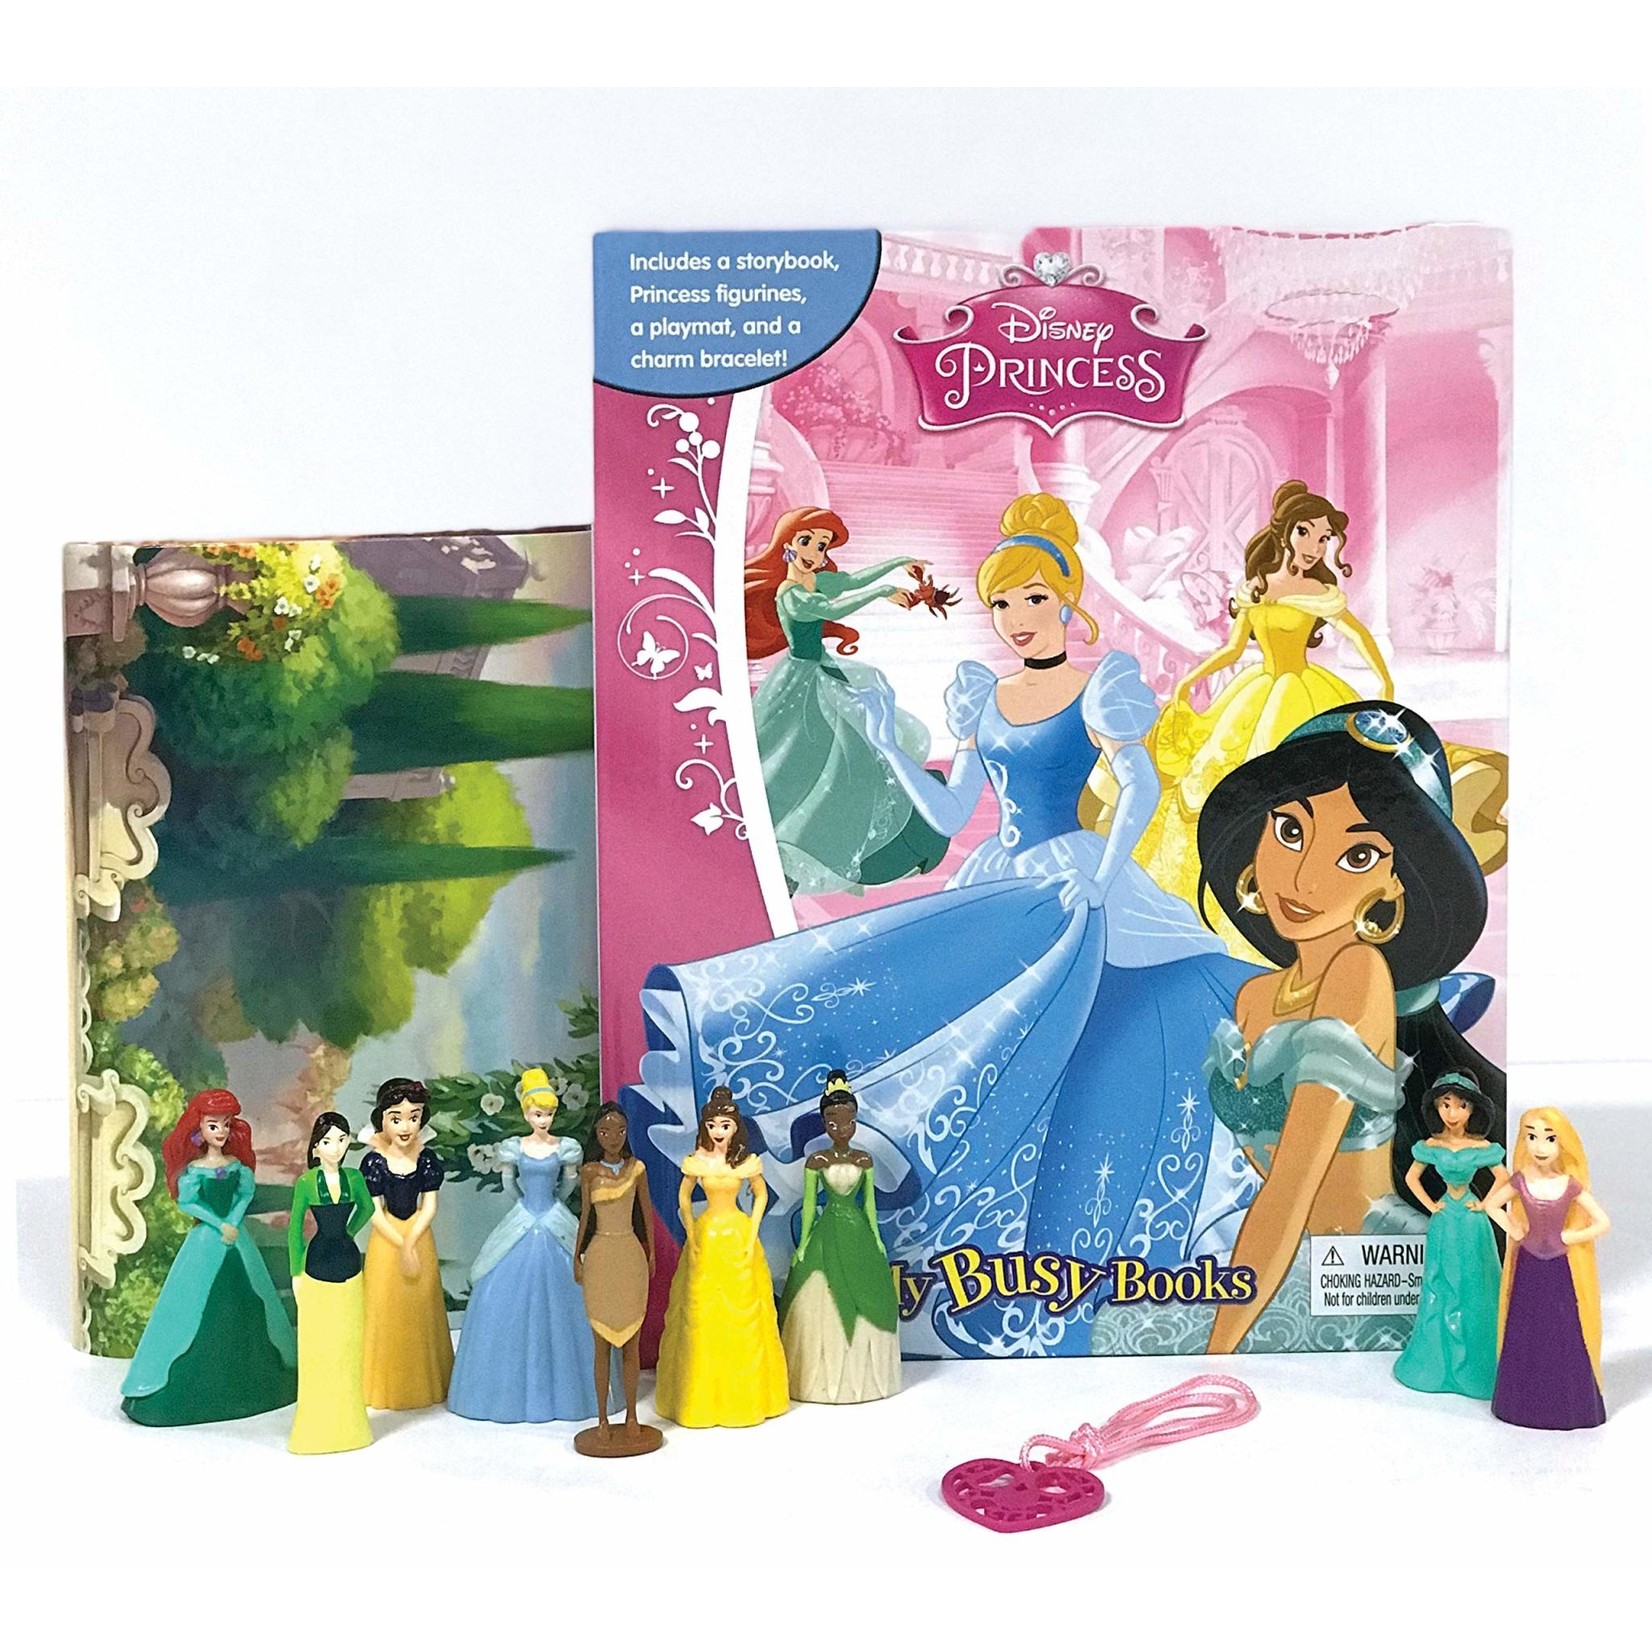 Disney Princess - Pretty Princess - My Busy Books (Includes storybook, 12 Disney figurines, and a playmat) ***Not for children under 3